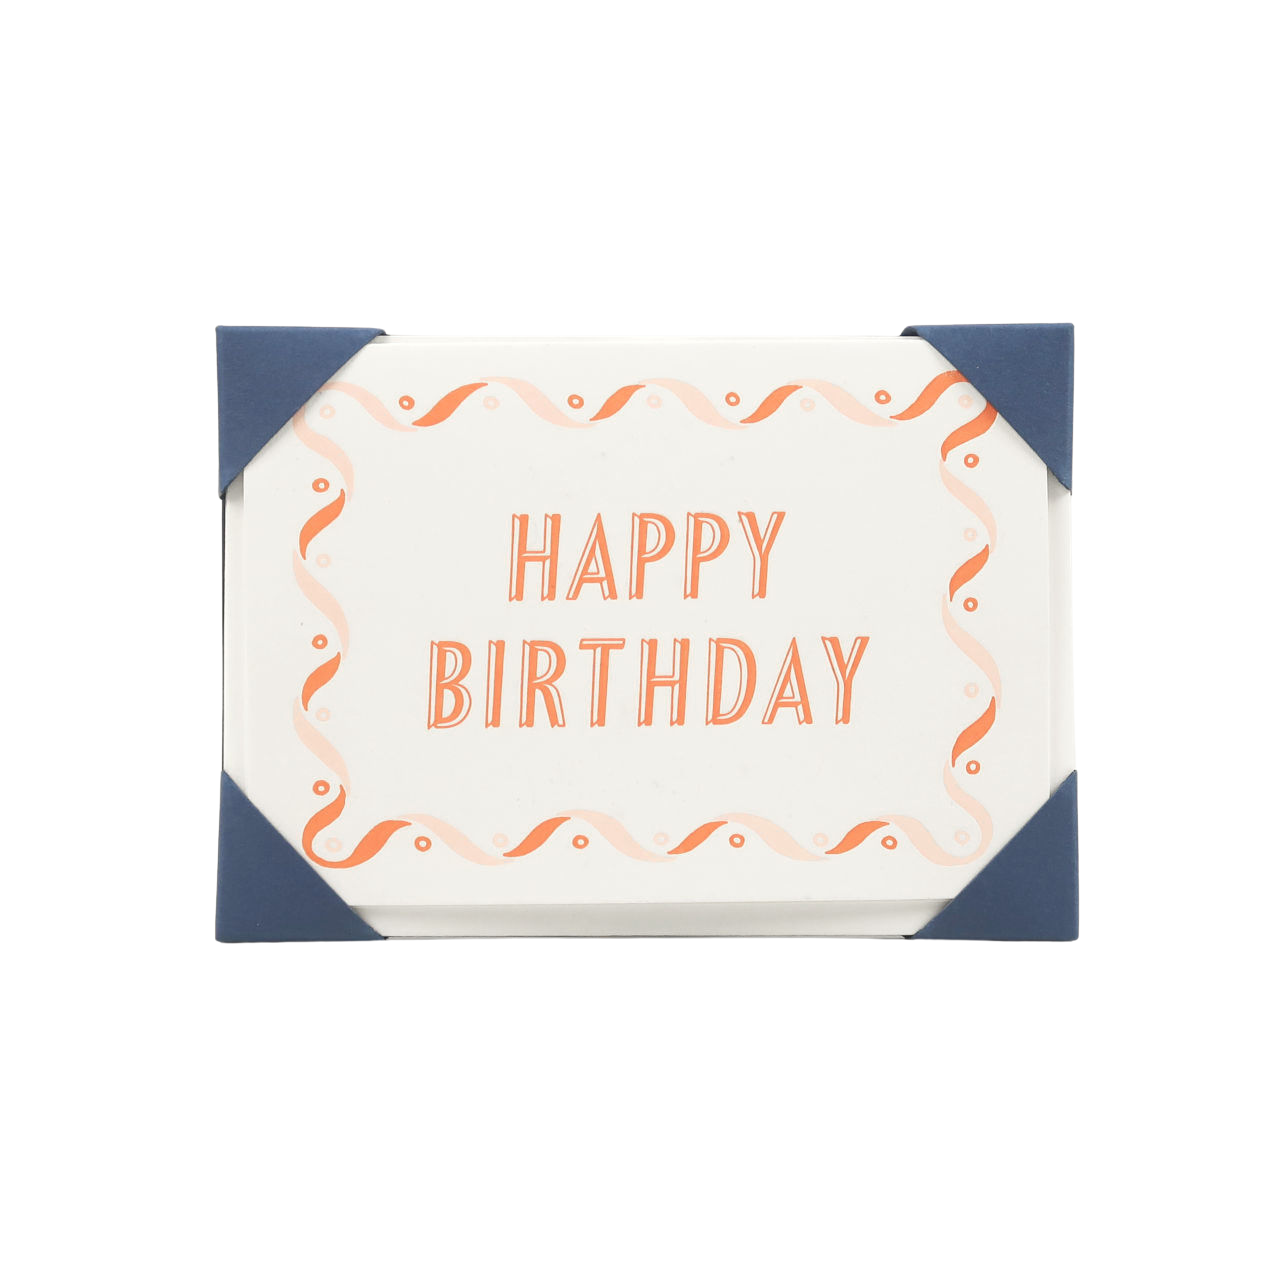 Archivist Pack of 10 Happy Birthday Cards